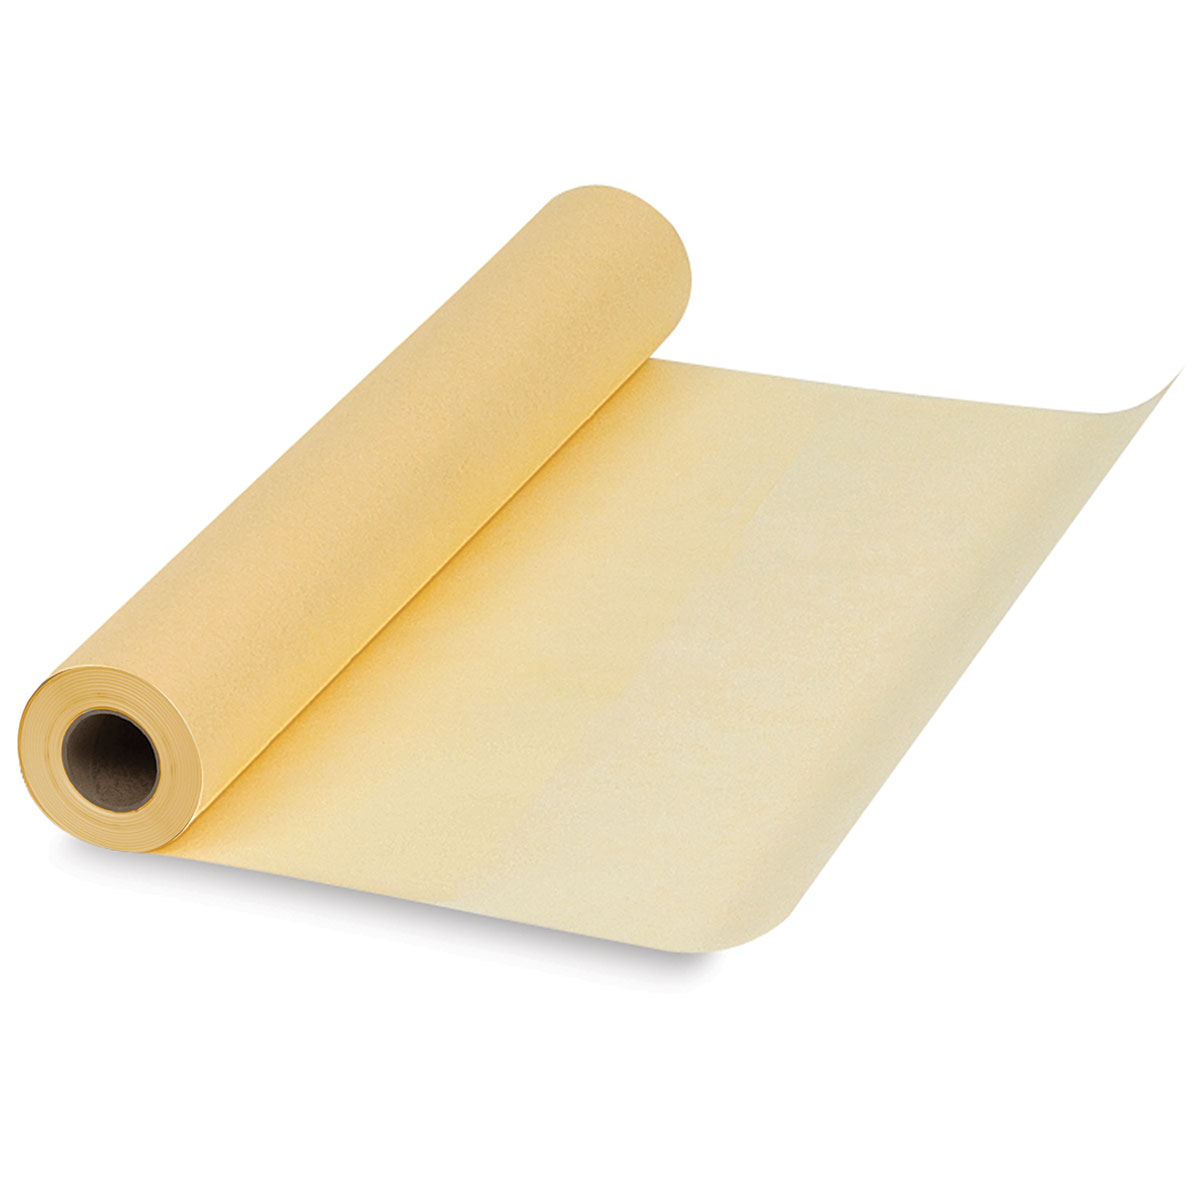 50 Yards Canary Yellow Bienfang Sketching Paper Roll Roll 18 Inches Width 341-136